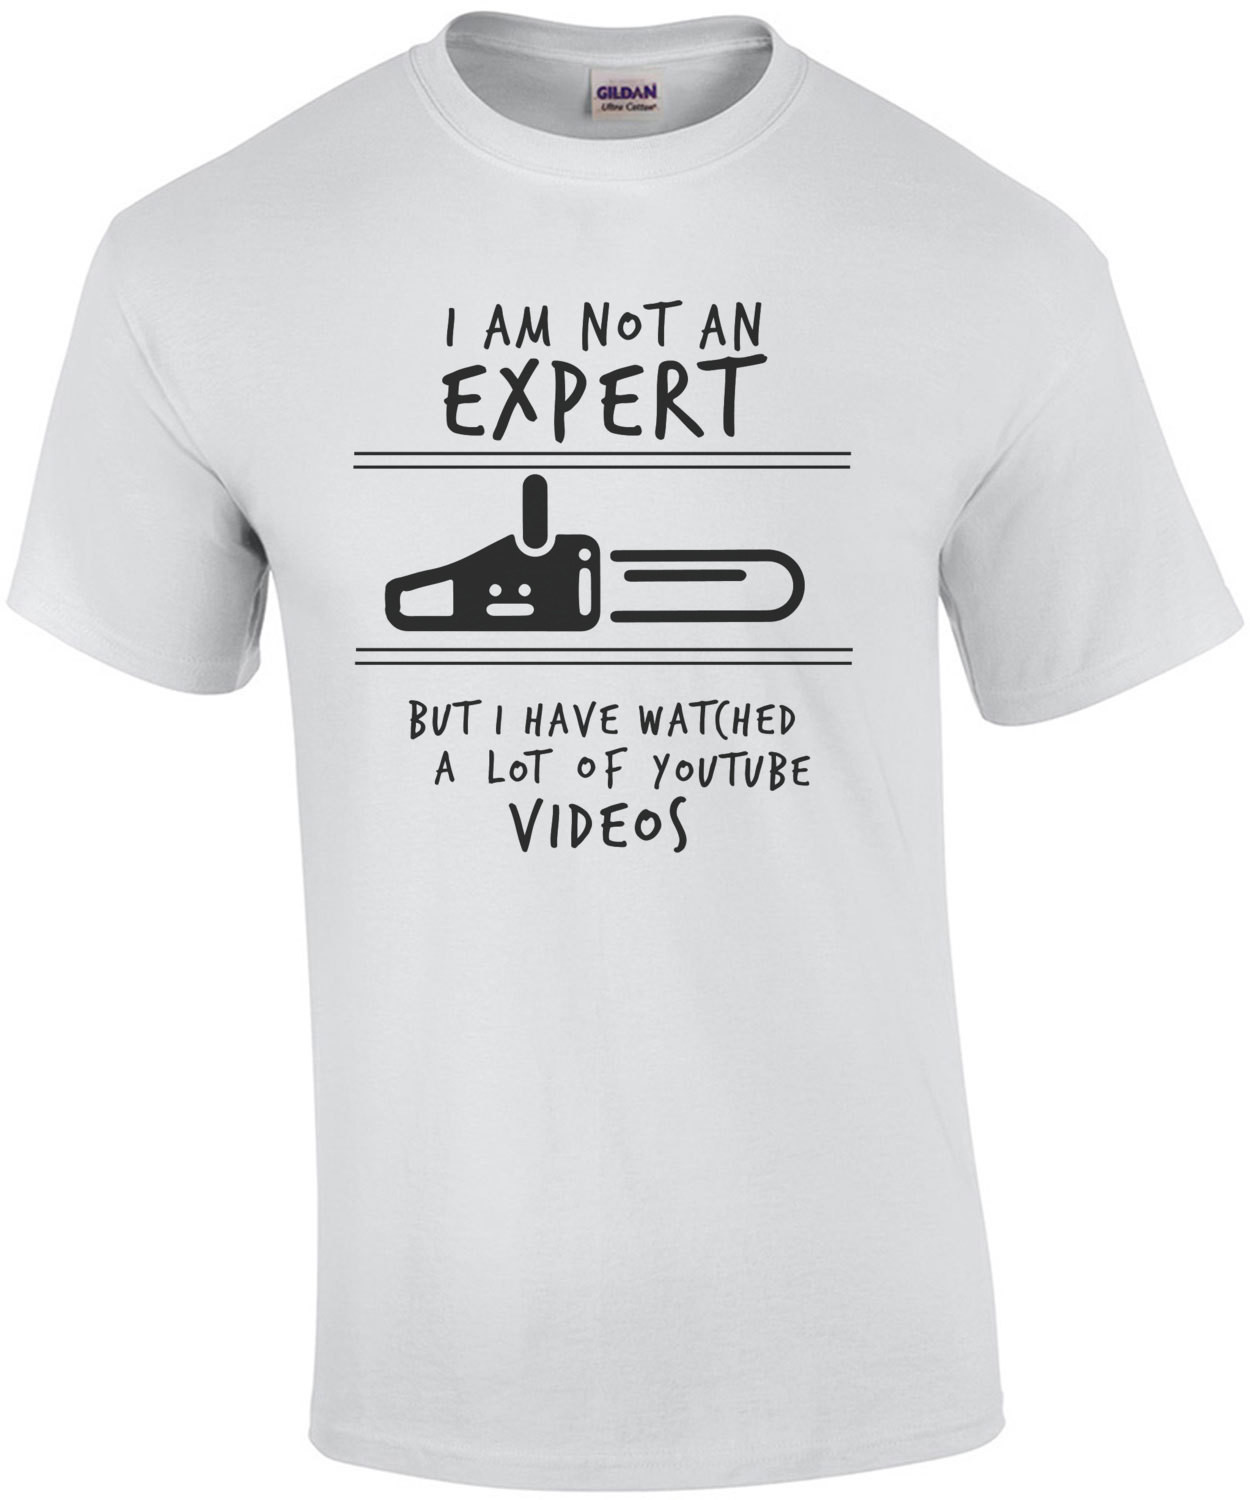 I am not an expert but I have watched a lot of youtube videos - funny t-shirt